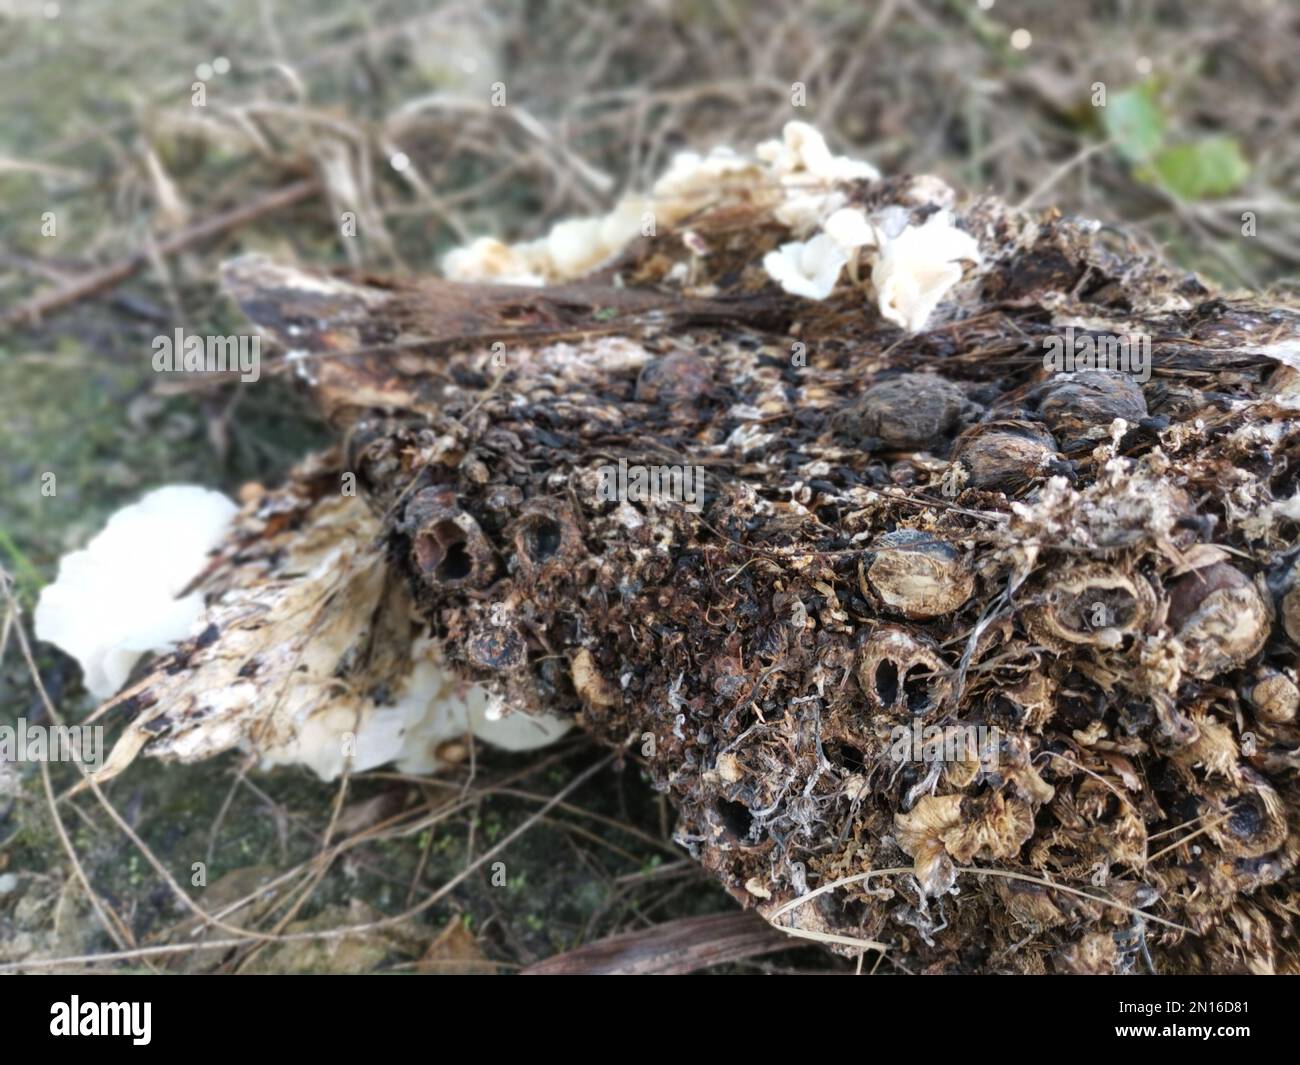 the tiny wild funnel fan-shaped mushrooms sprouting from the decaying cluster of oil palm fruit. Stock Photo